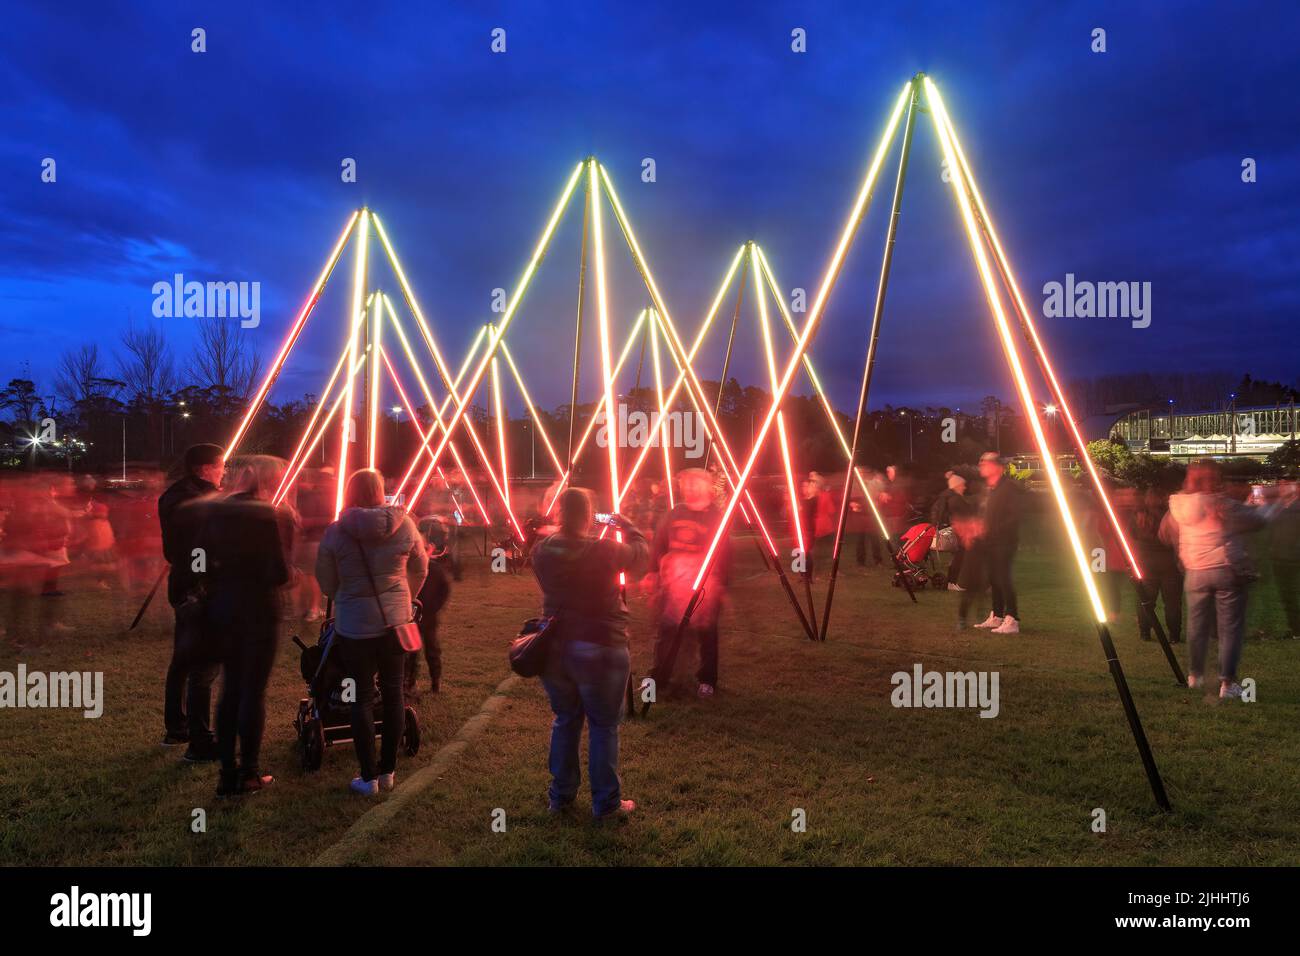 Light tube sculptures in a park in Auckland, New Zealand, during celebrations of Matariki, the Maori new year Stock Photo